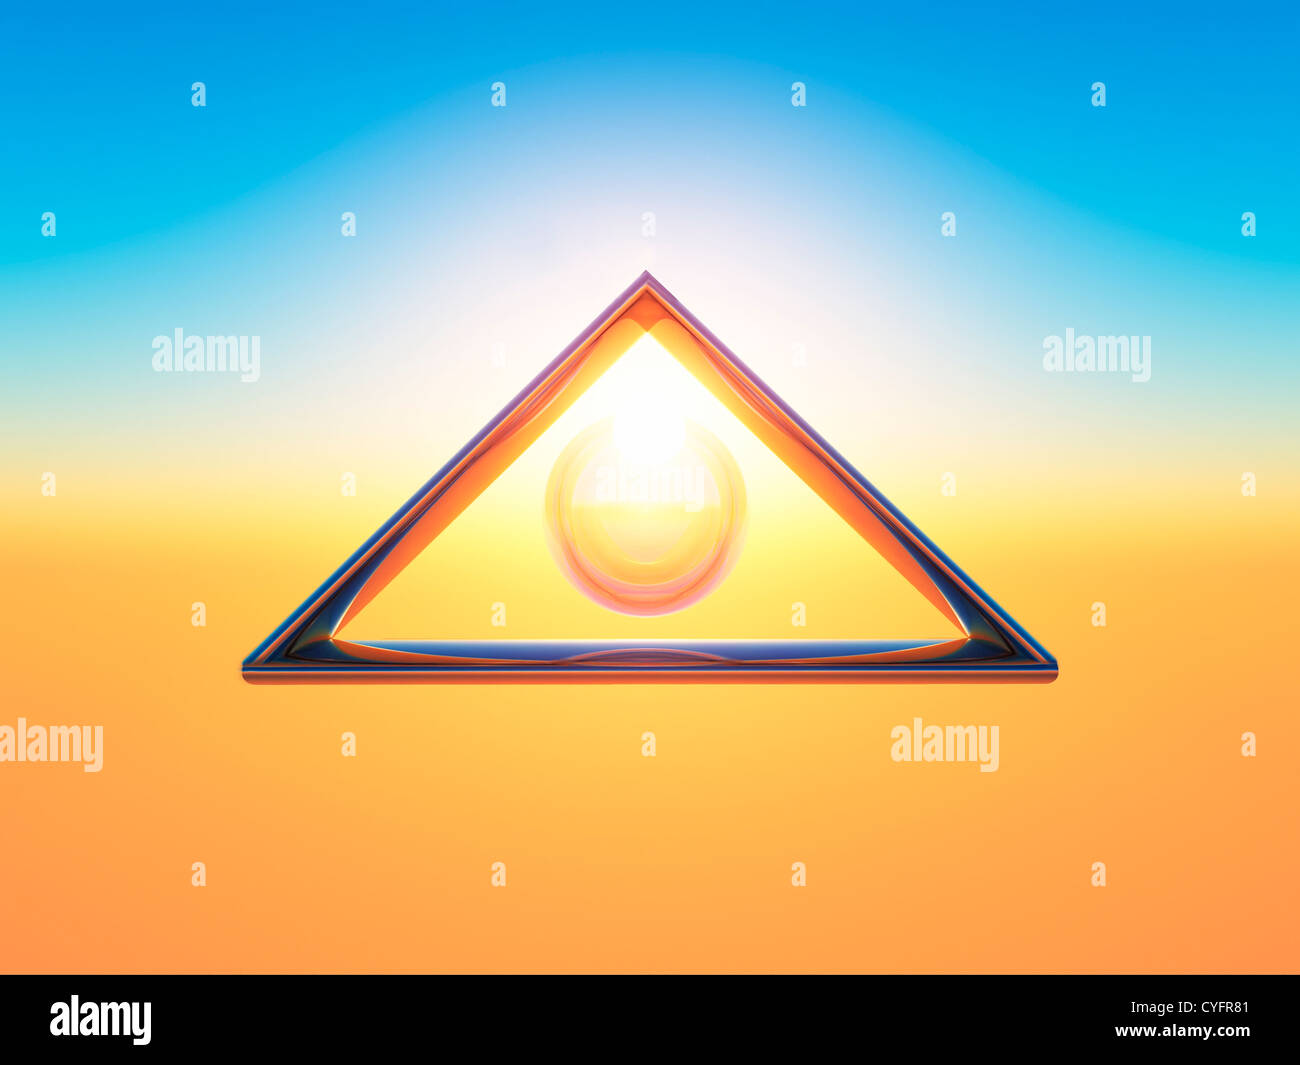 a triangle with a bubble inside Stock Photo